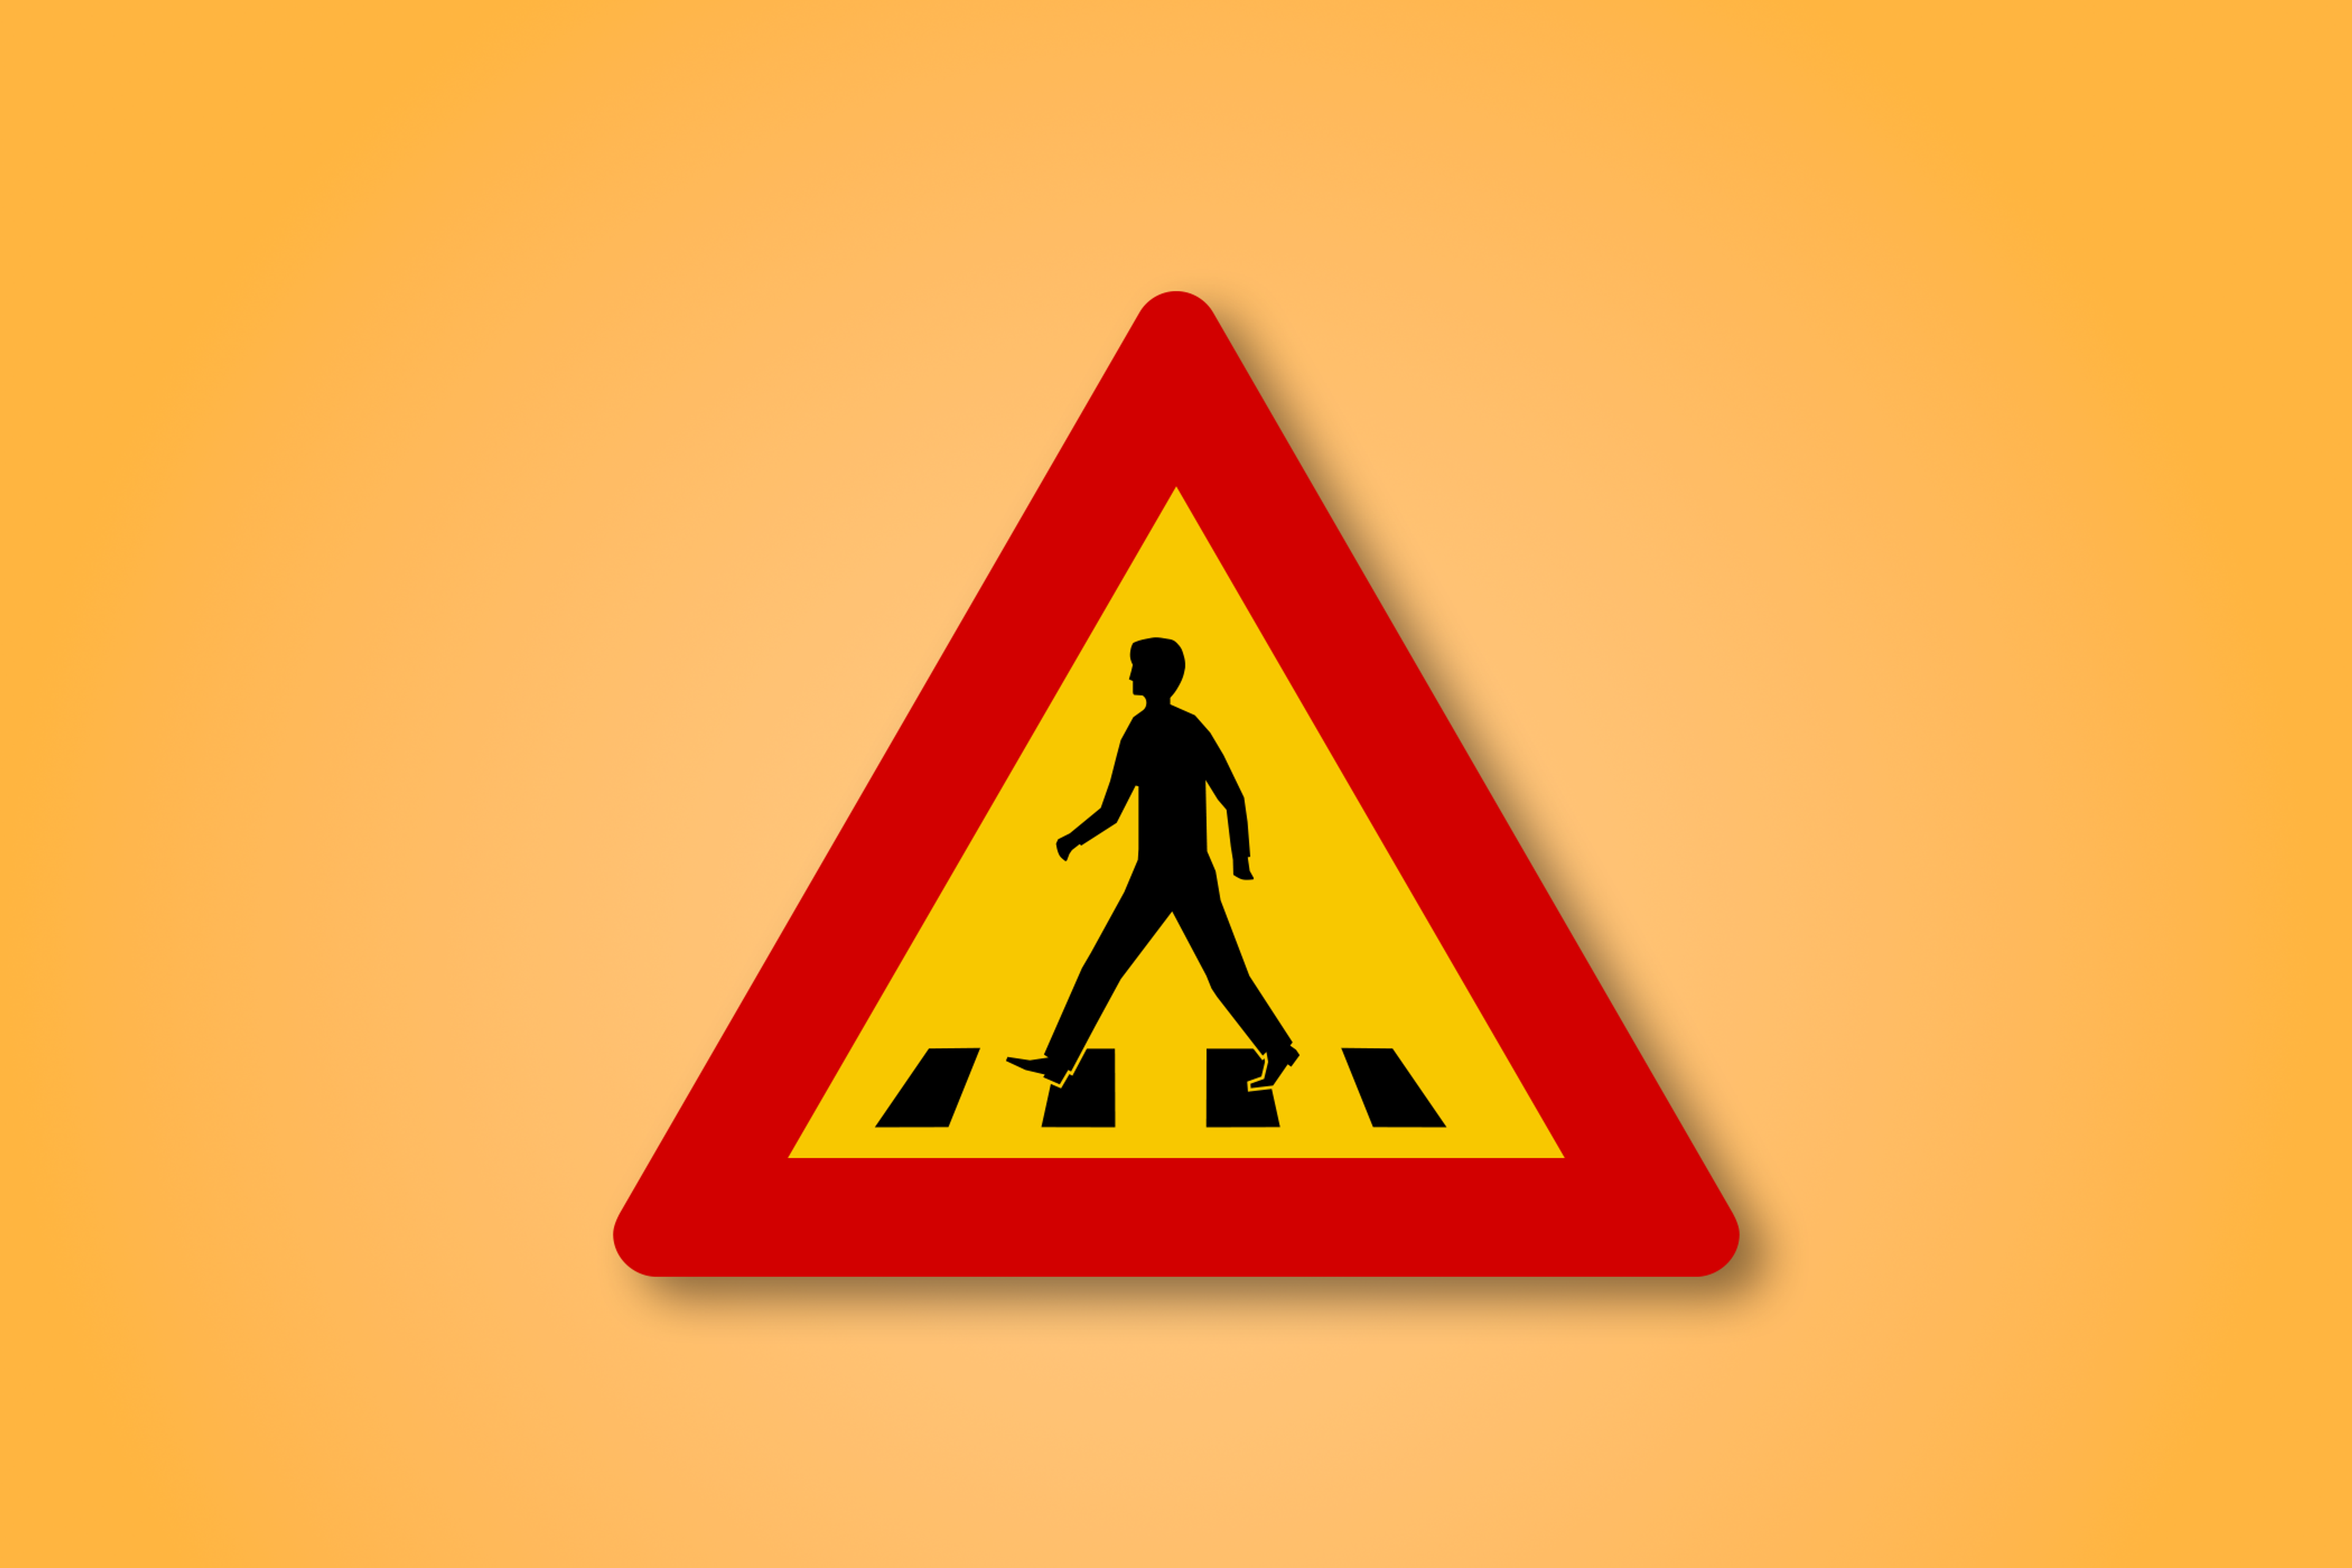 Red and yellow triangle road sign with a men walking in the middle. This road sign means Zebra Crossing ahead